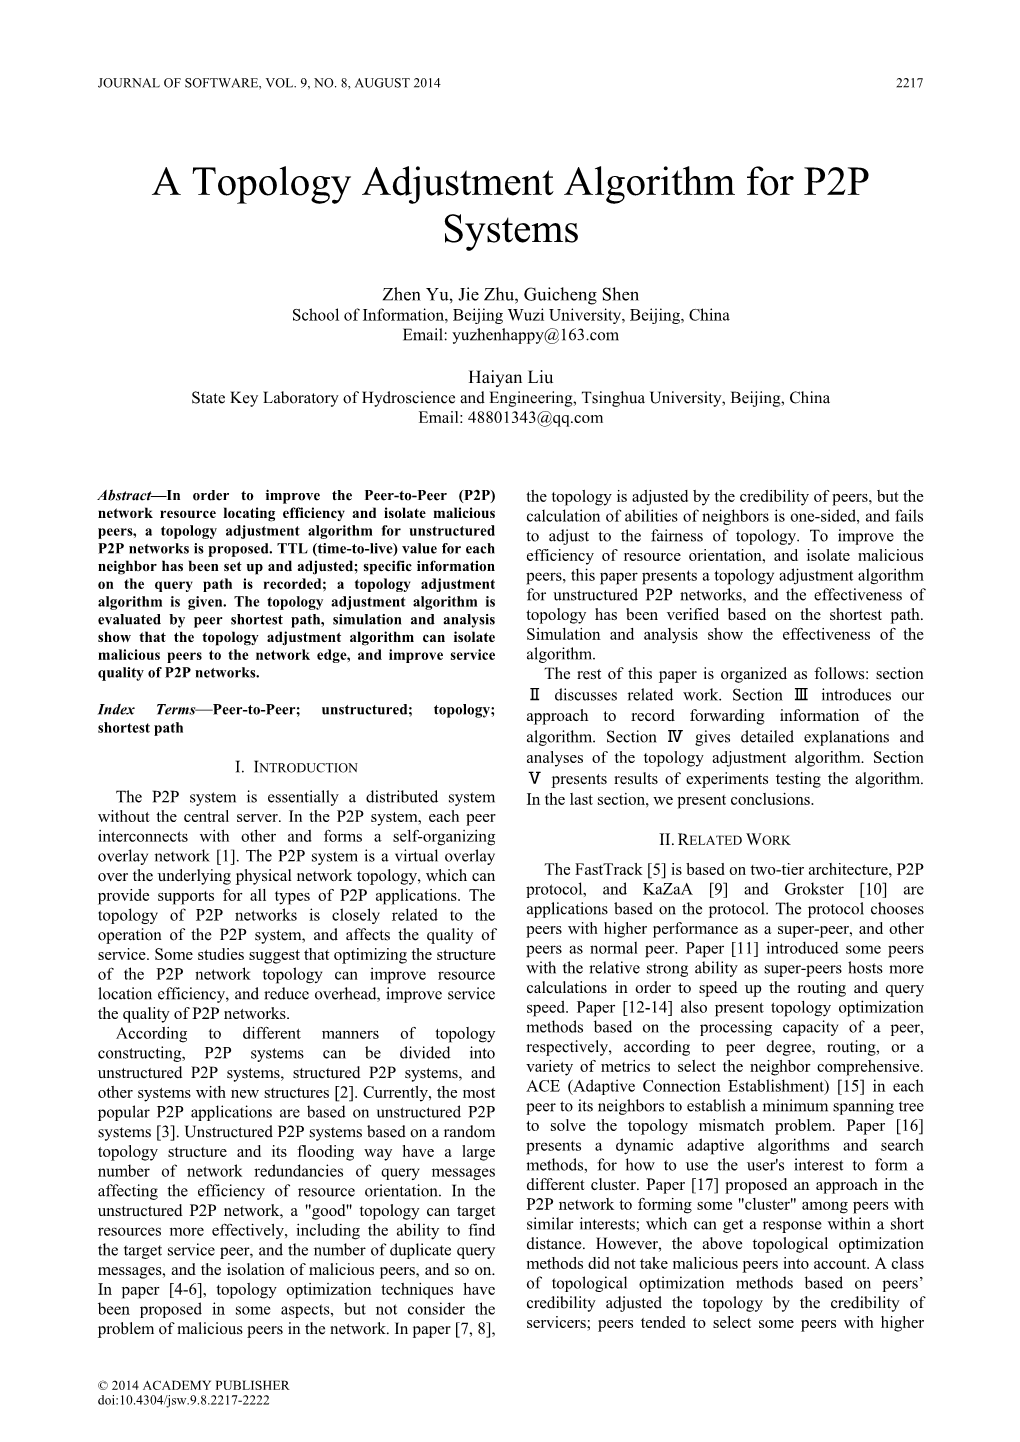 A Topology Adjustment Algorithm for P2P Systems